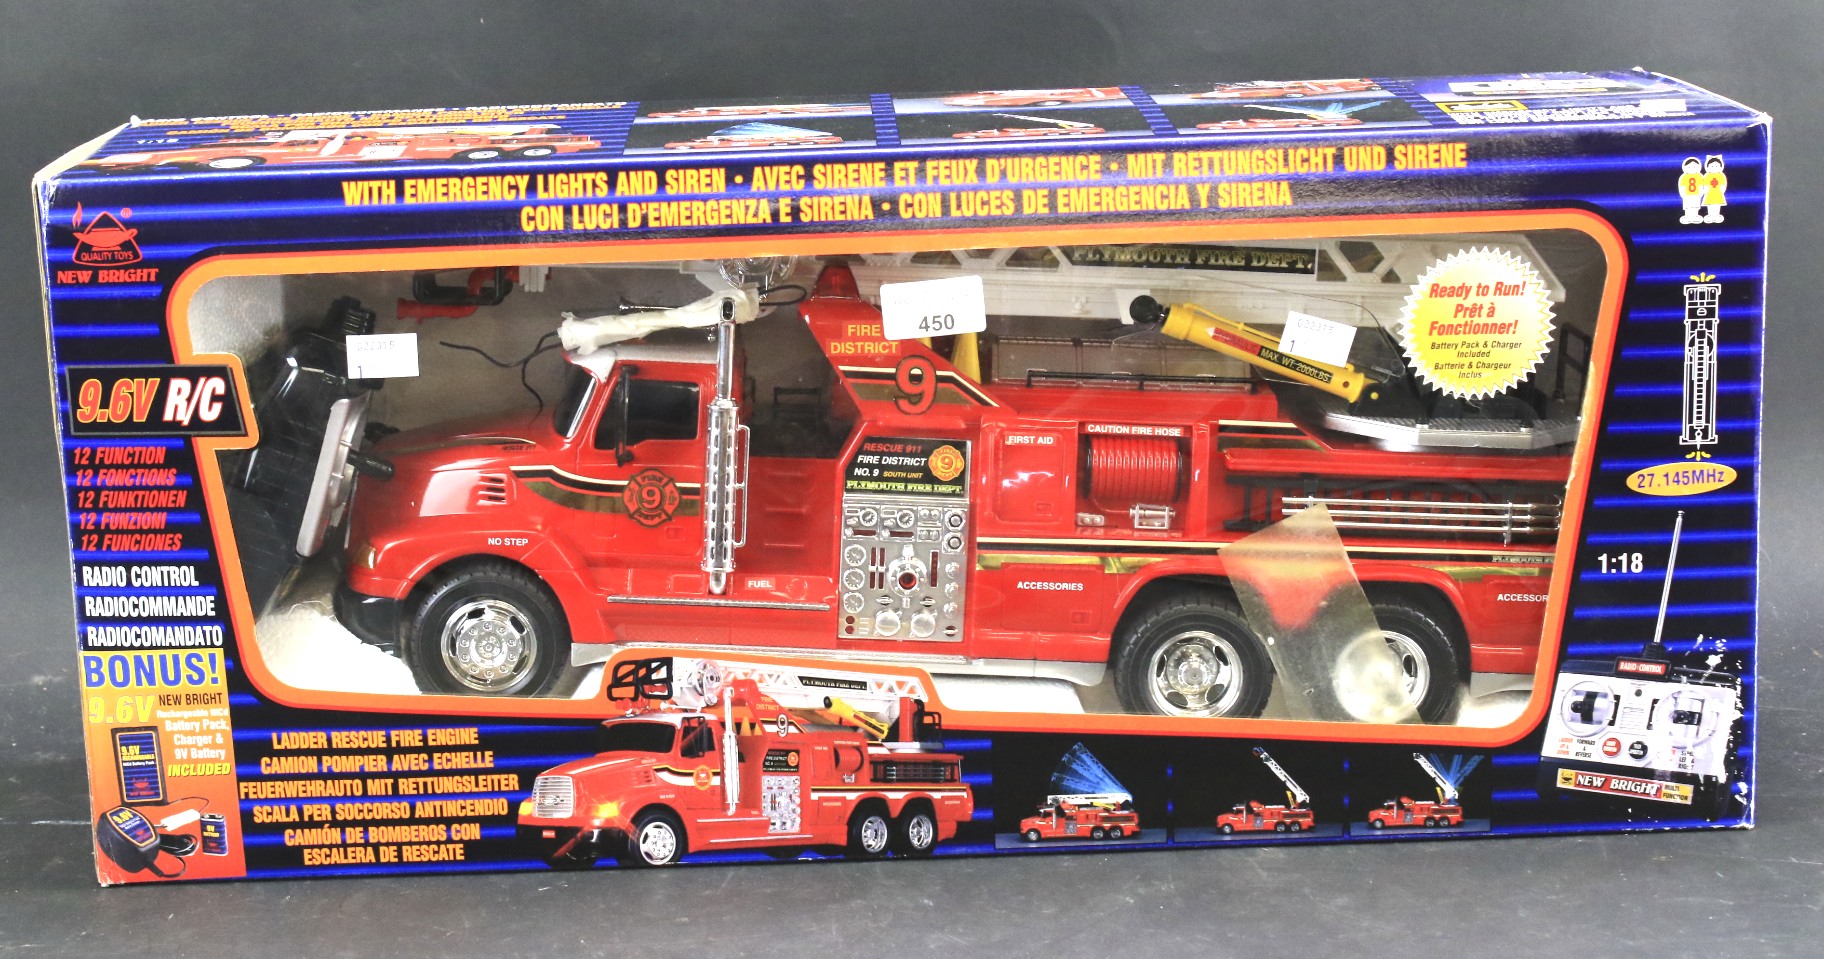 A boxed New Bright fire engine and remote control. With emergency lights and siren.